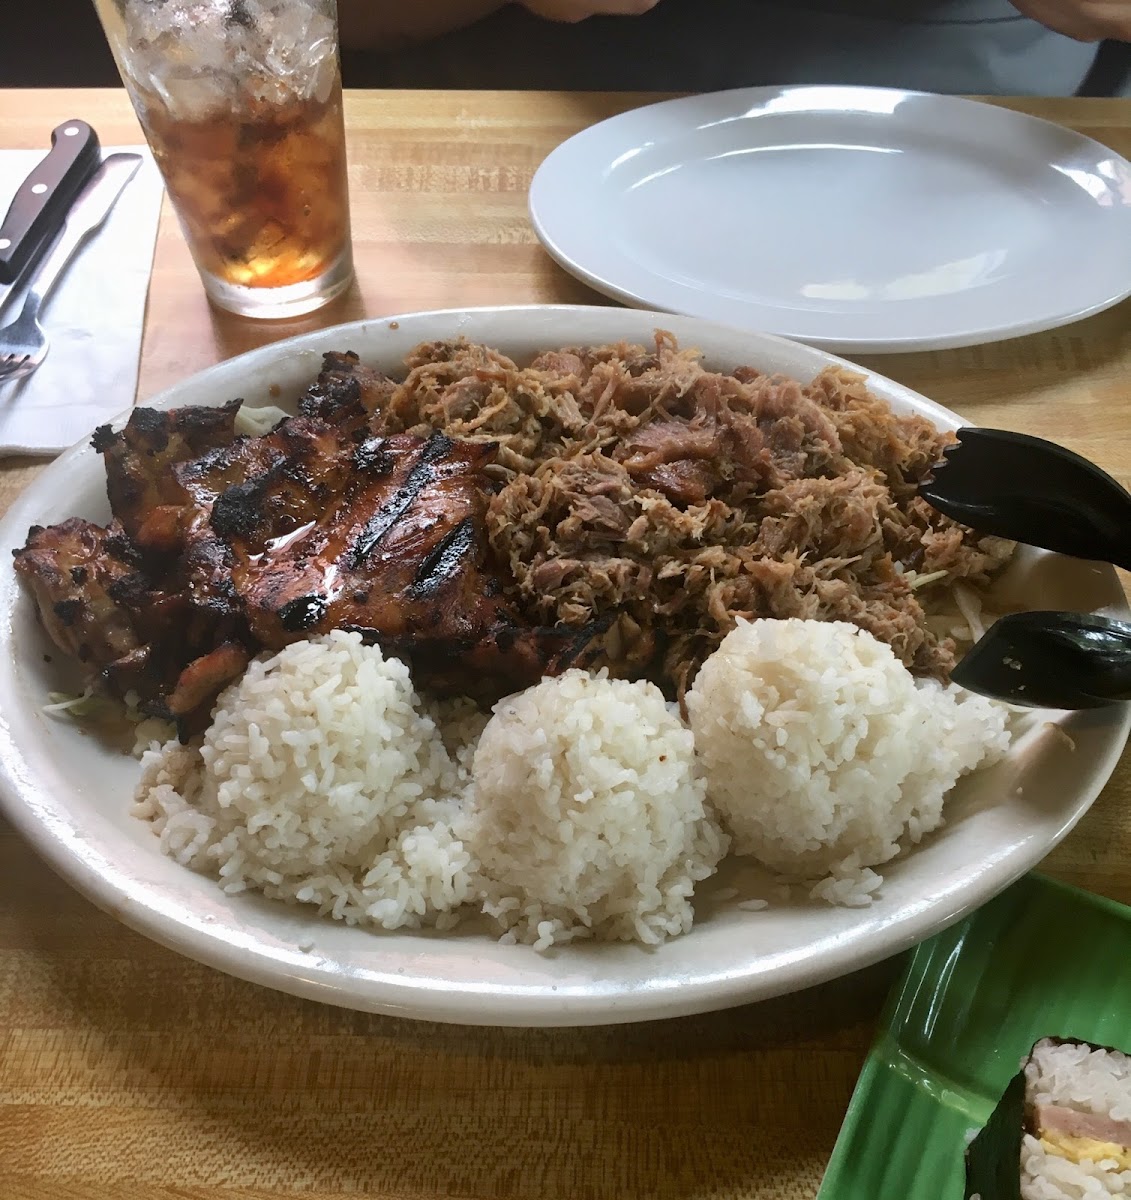 Grilled teriyaki chicken and kalua pork combo with rice